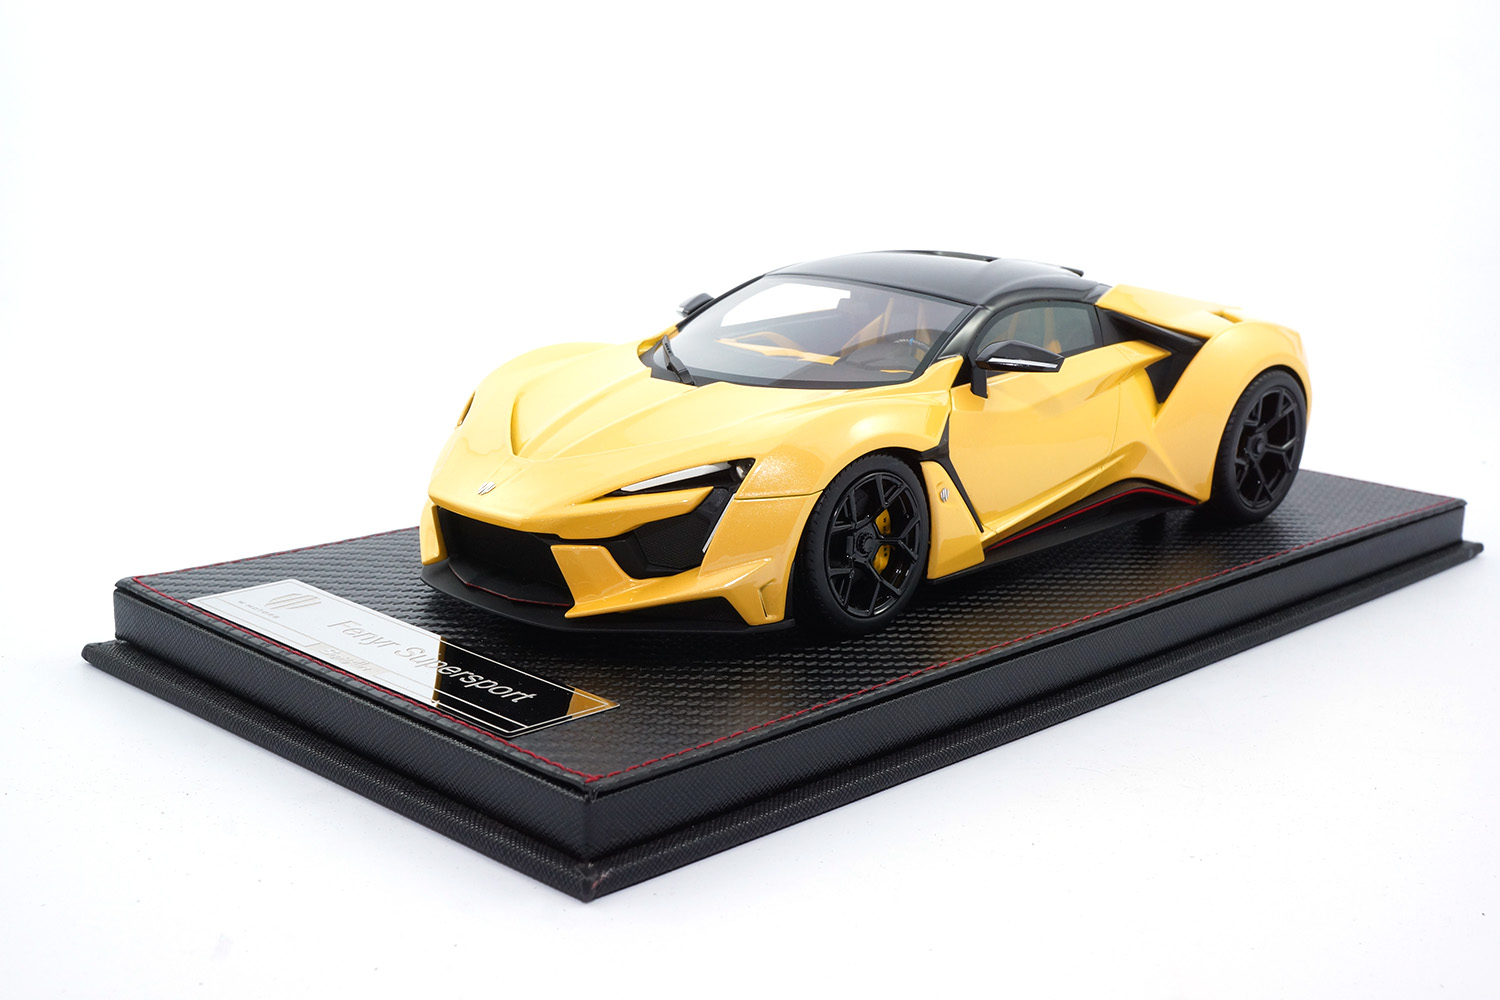 FrontiArt SA003-68 Fenyr Supersport (W Motors) - Yellow 1:18